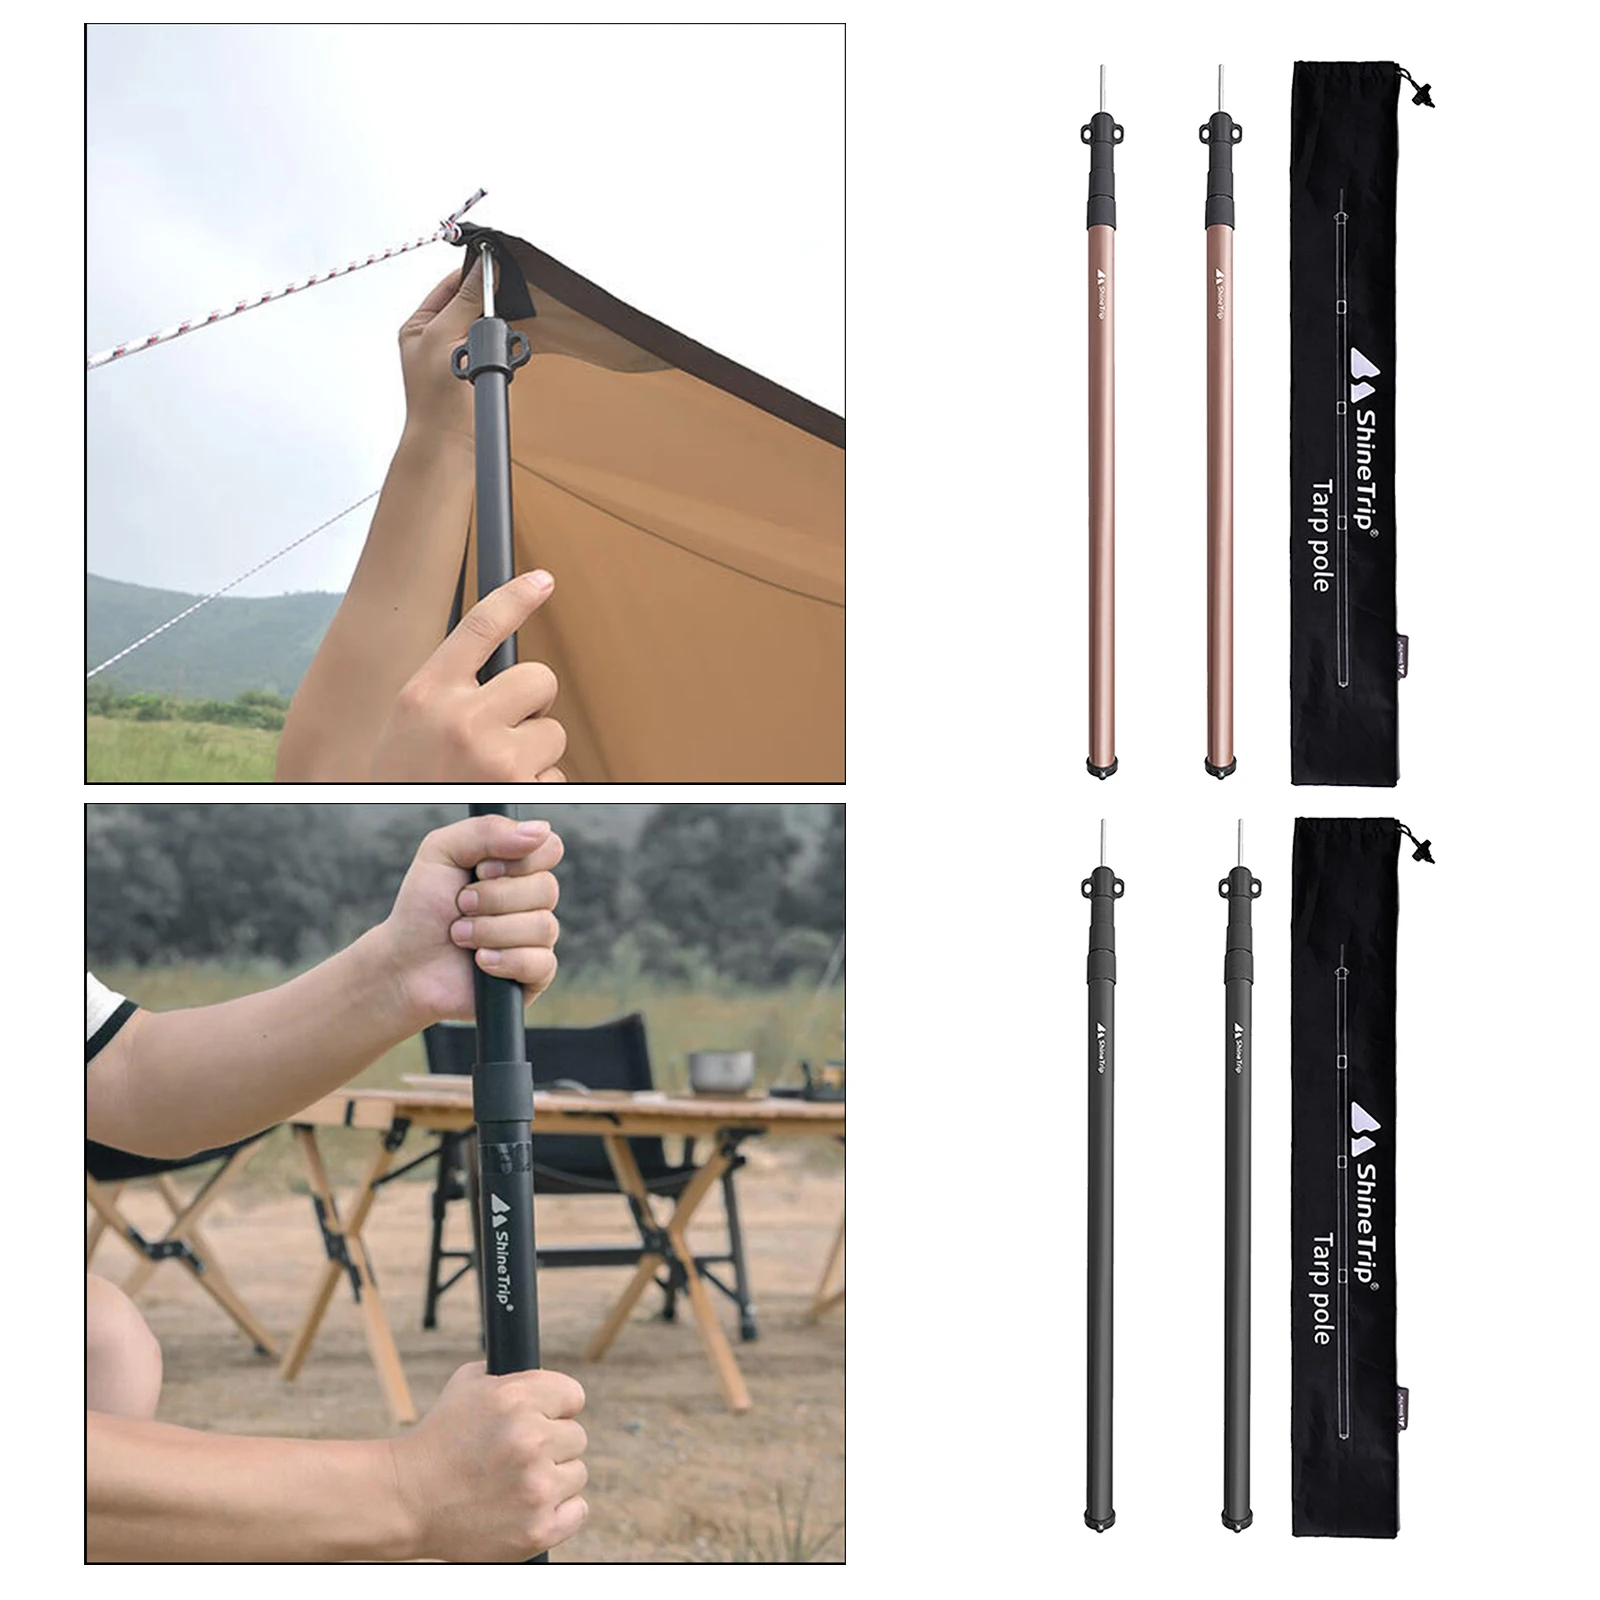 Adjustable Tarp Poles, Set of 2 Telescopic Rods for Tent Fly Tarps Support, Tent Poles for Camping, Backpacking, Hiking